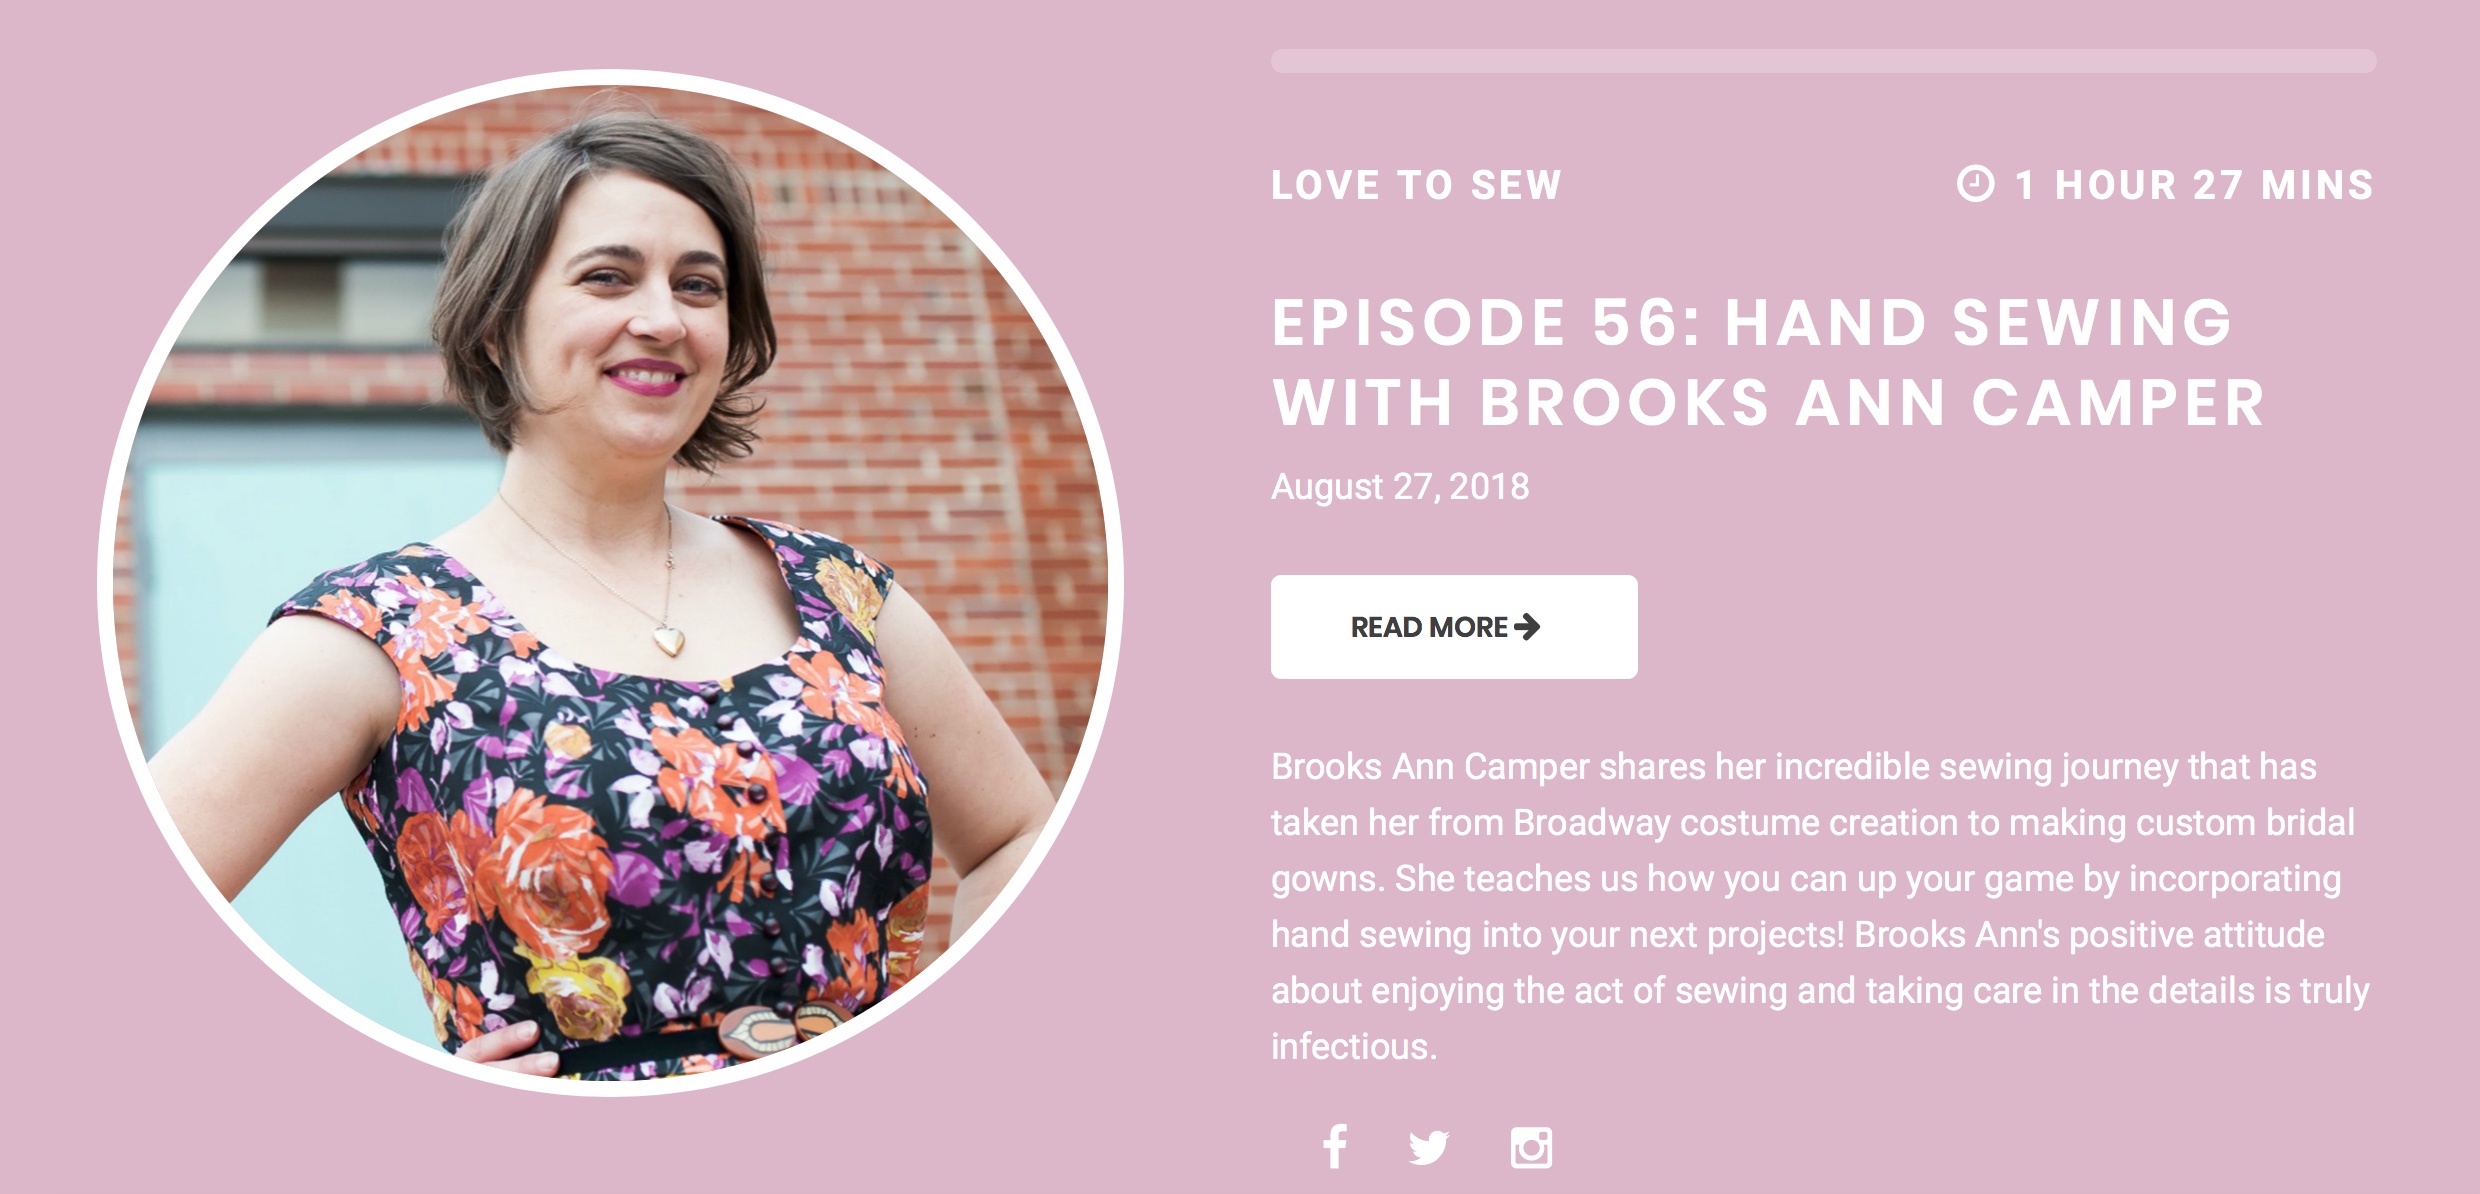 My Love To Sew Podcast Interview! - Brooks Ann Camper Bespoke Sewing